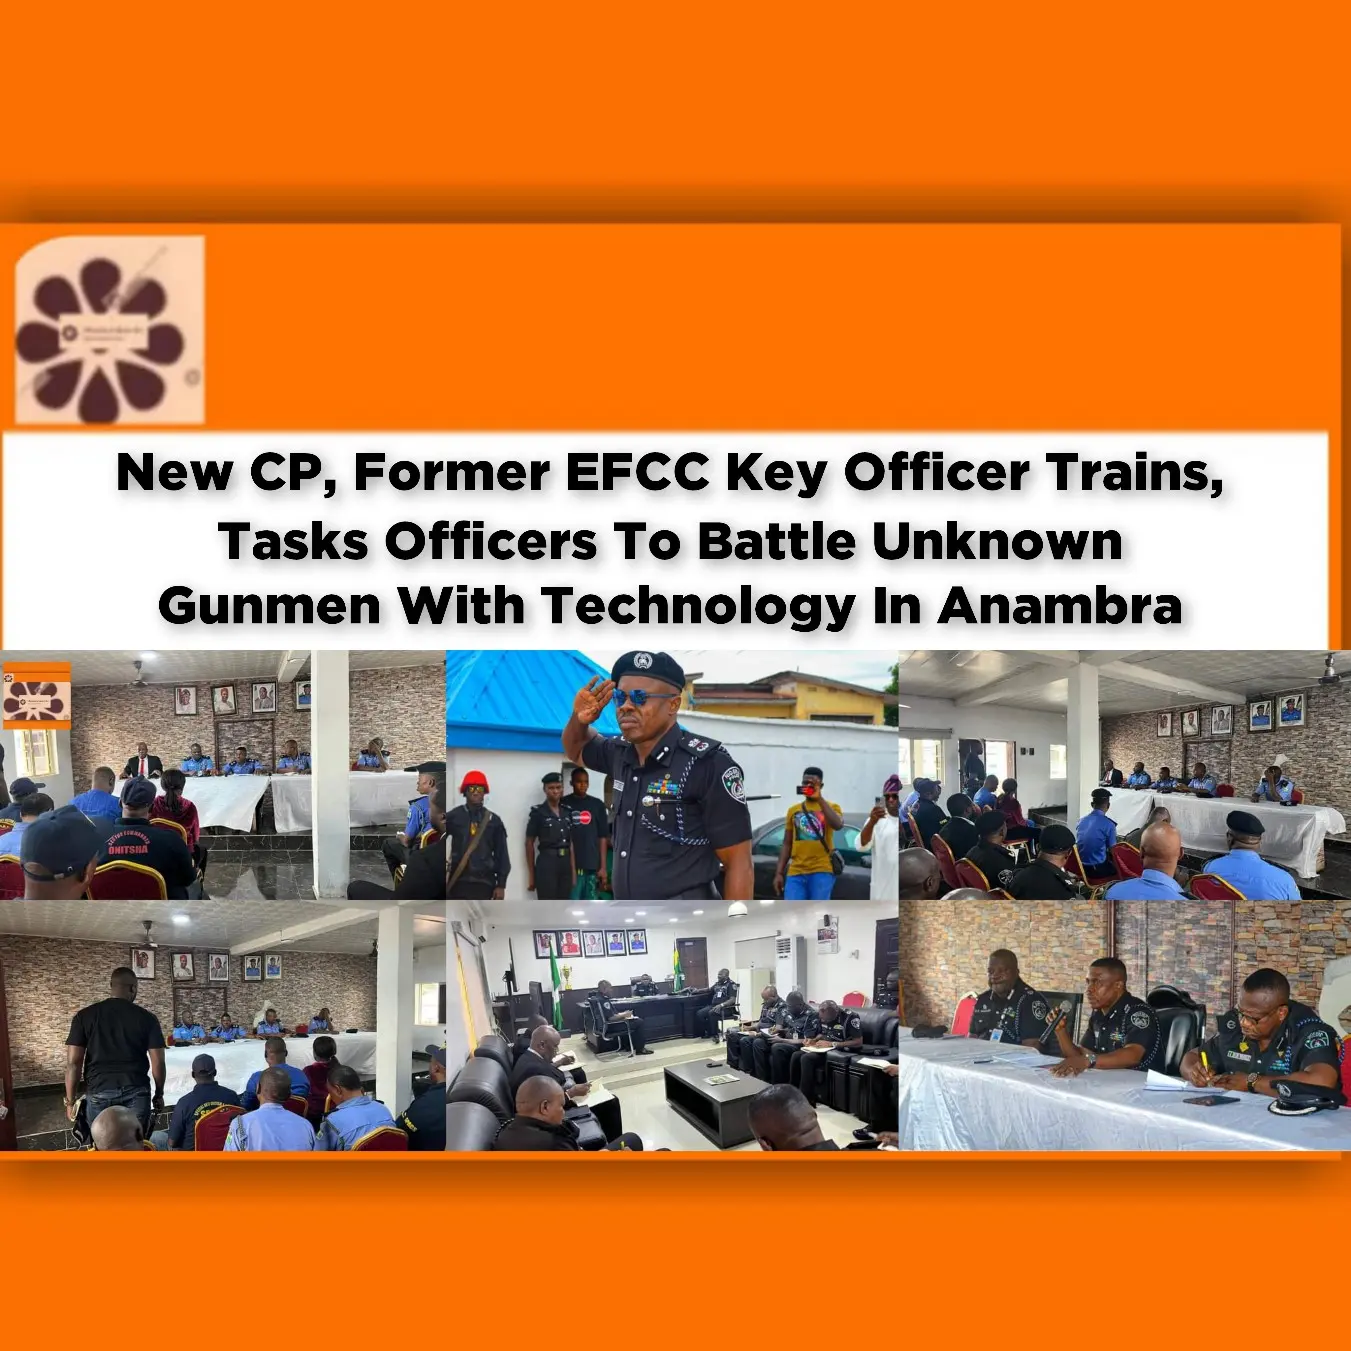 New CP, Former EFCC Key Officer Trains, Tasks Officers To Battle Unknown Gunmen With Technology In Anambra ~ OsazuwaAkonedo #Anambra #CP #Drones #EFCC #Itam #Nnaghe #Obono #Police #UnknownGunmen